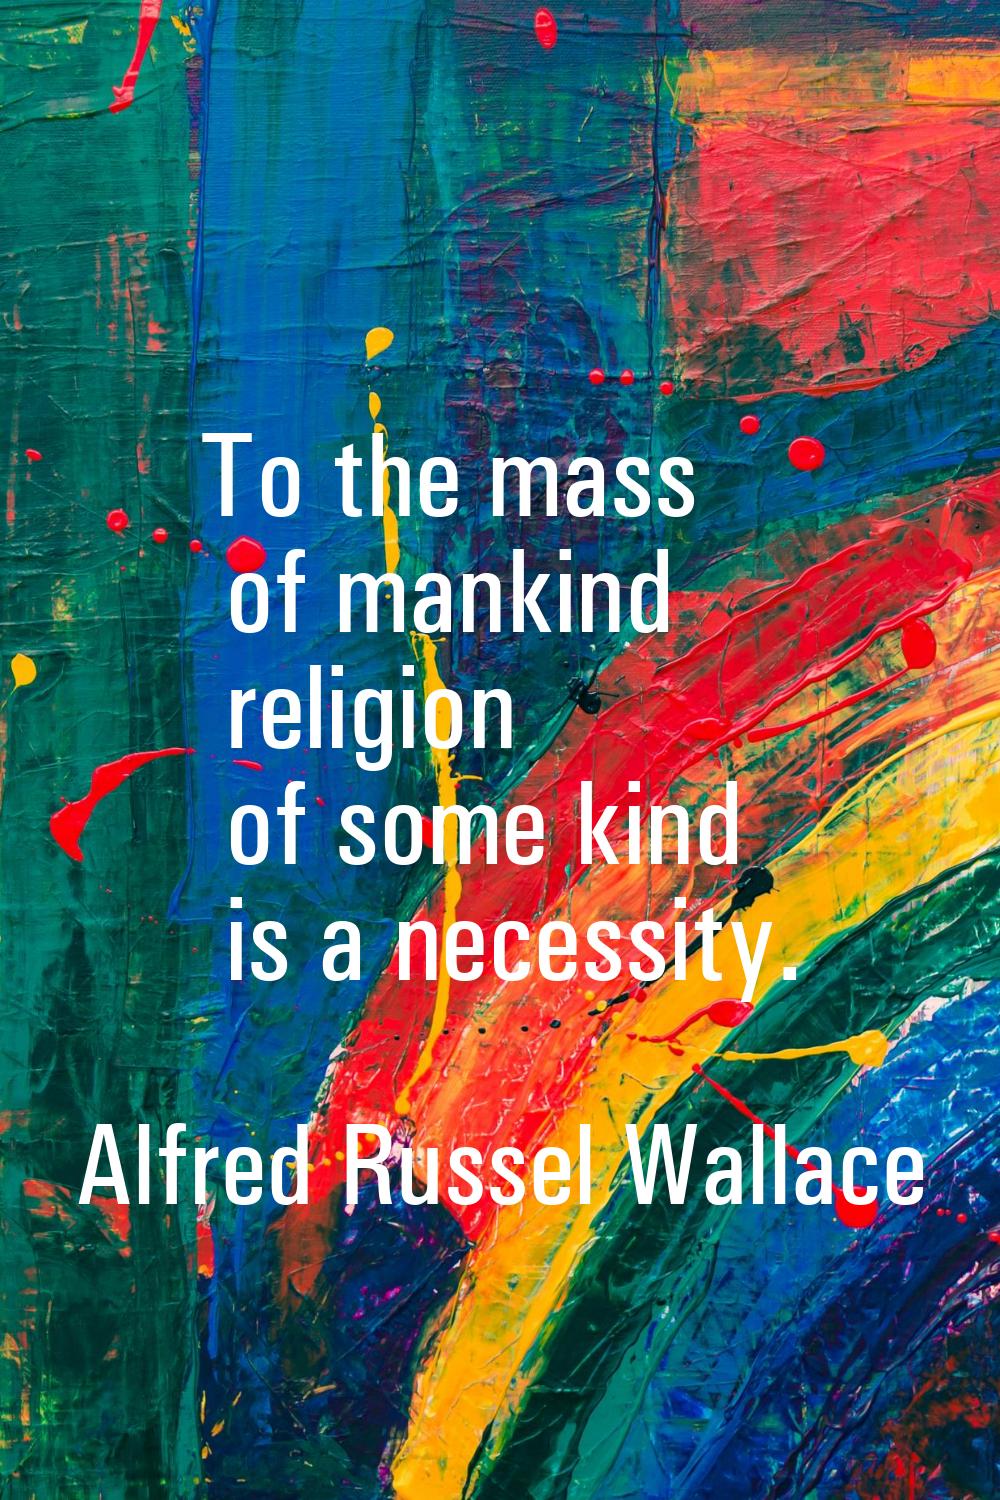 To the mass of mankind religion of some kind is a necessity.